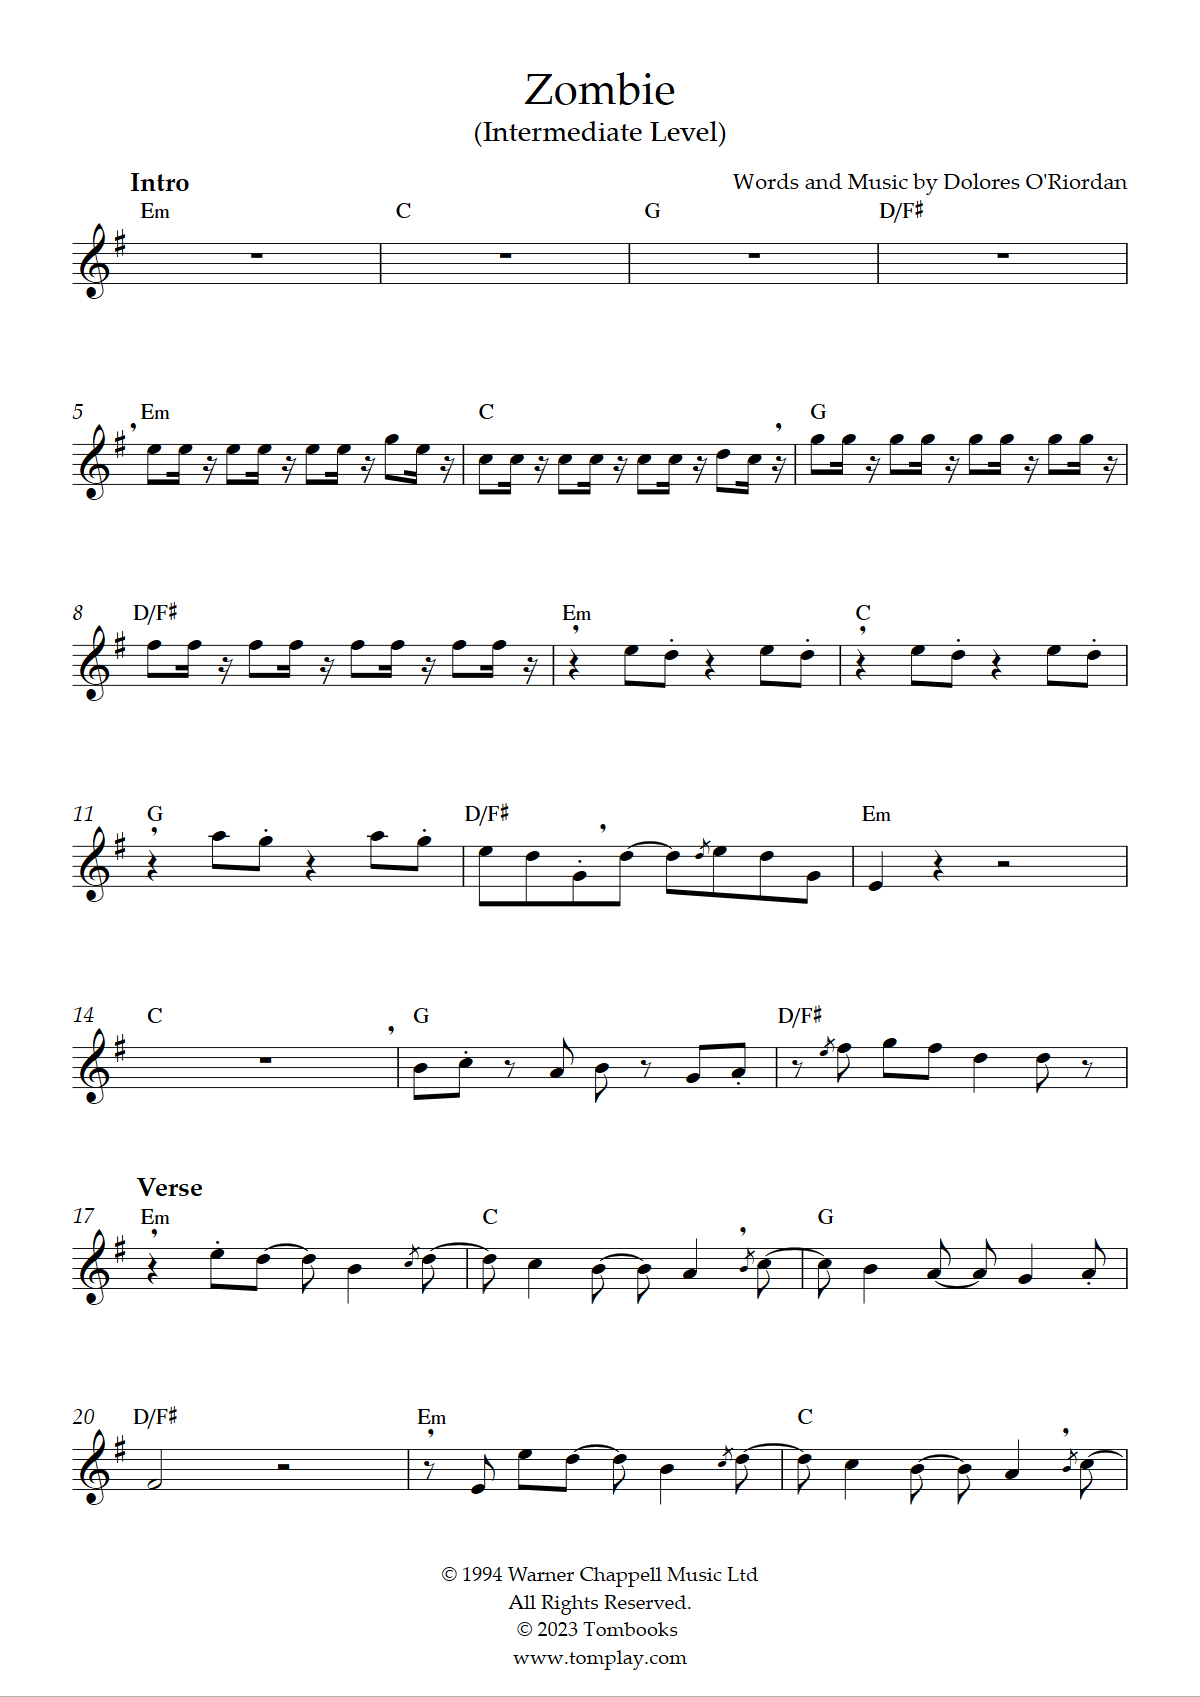 Zombie (The Cranberries) by D. O'Riordan - sheet music on MusicaNeo